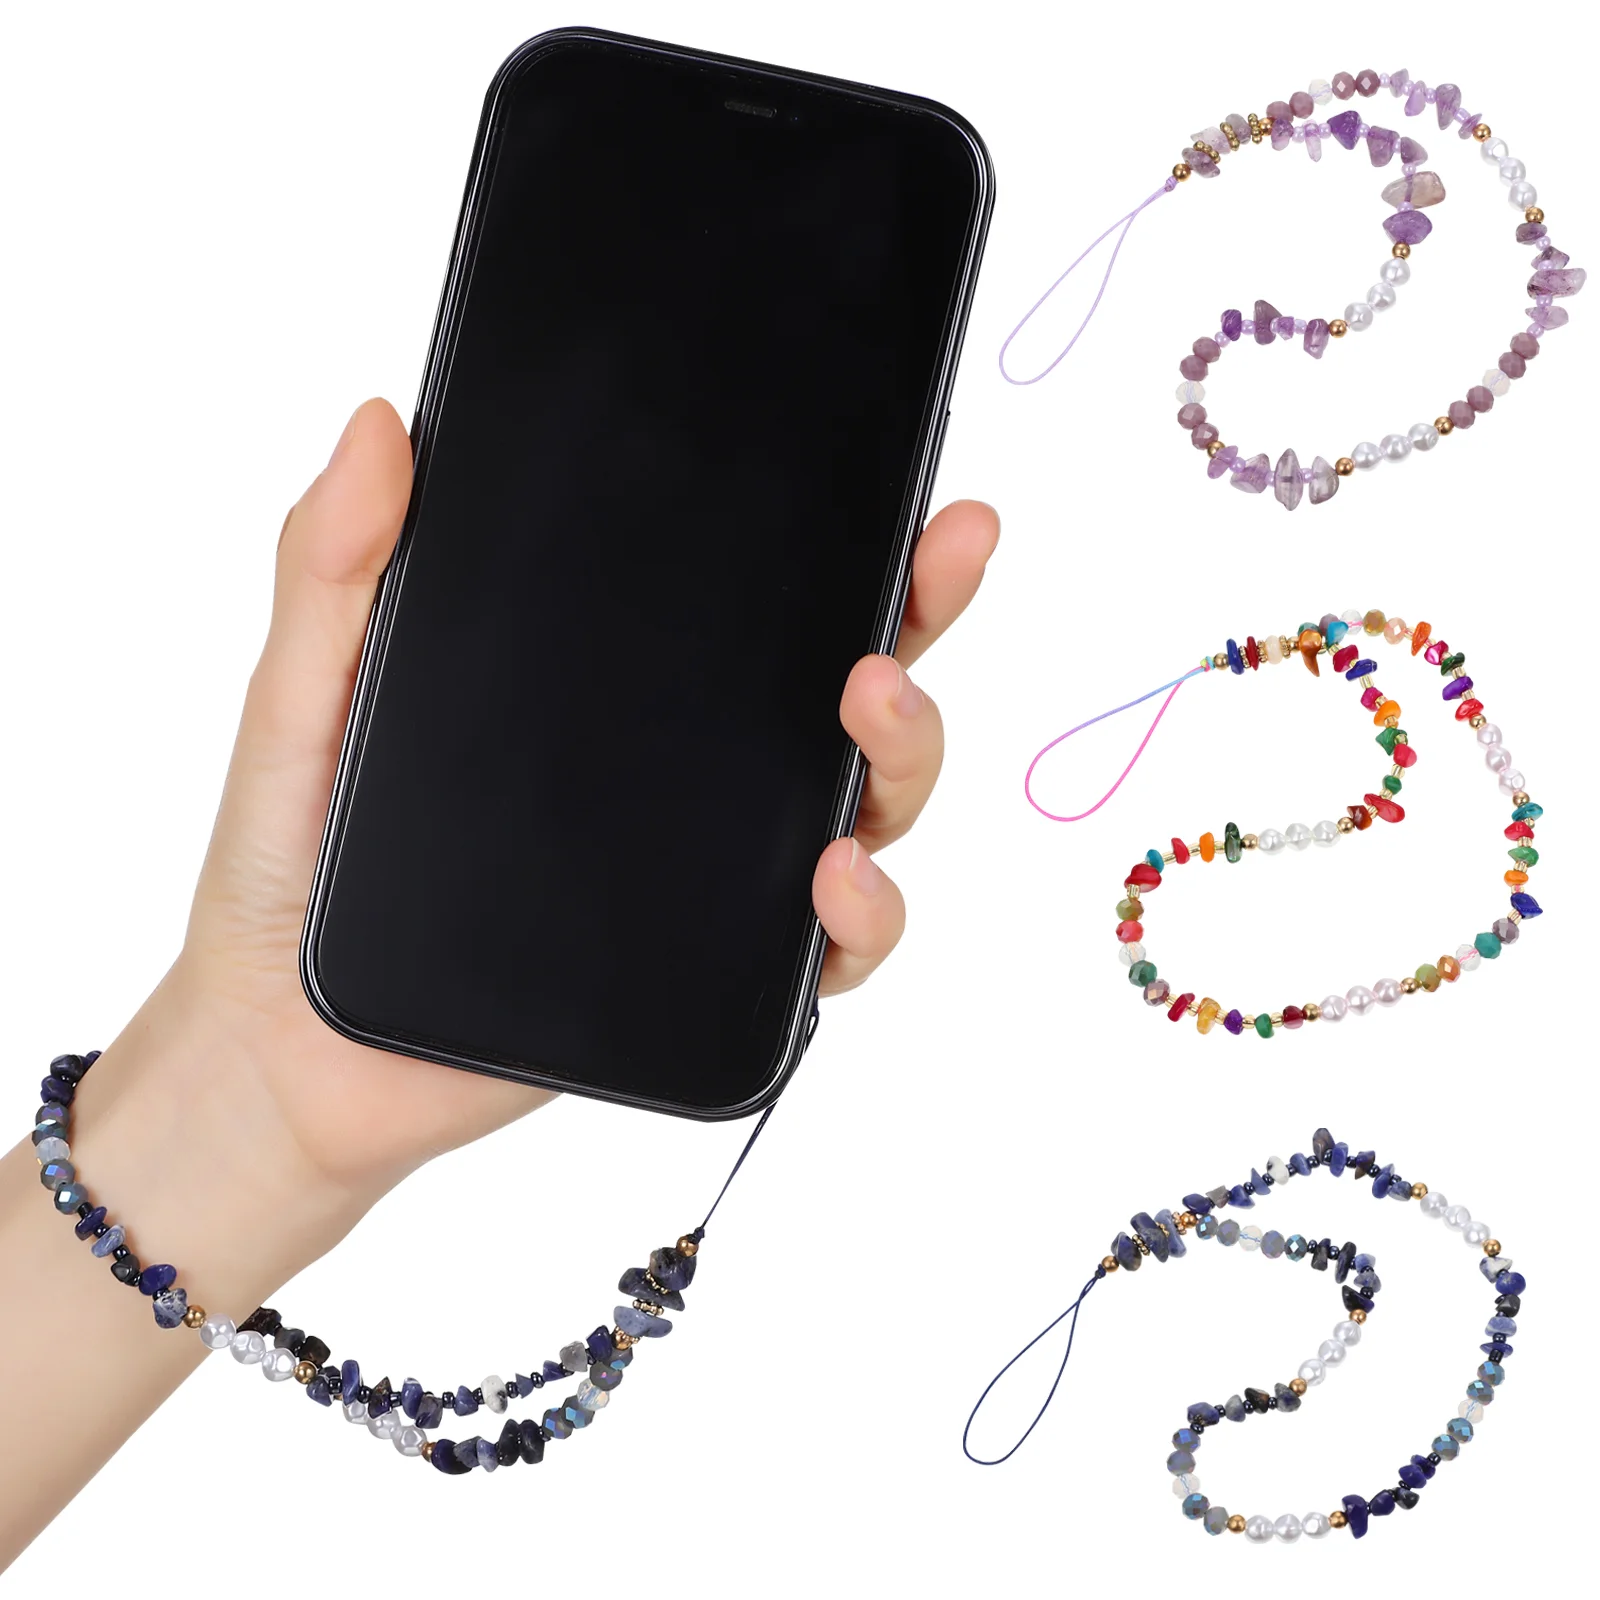 

3 Pcs Crushed Stone Pearl Color Matching Cellphone Wrist Rope Lanyard Beaded Chain Gravel Charms Miss Lanyards for Keys